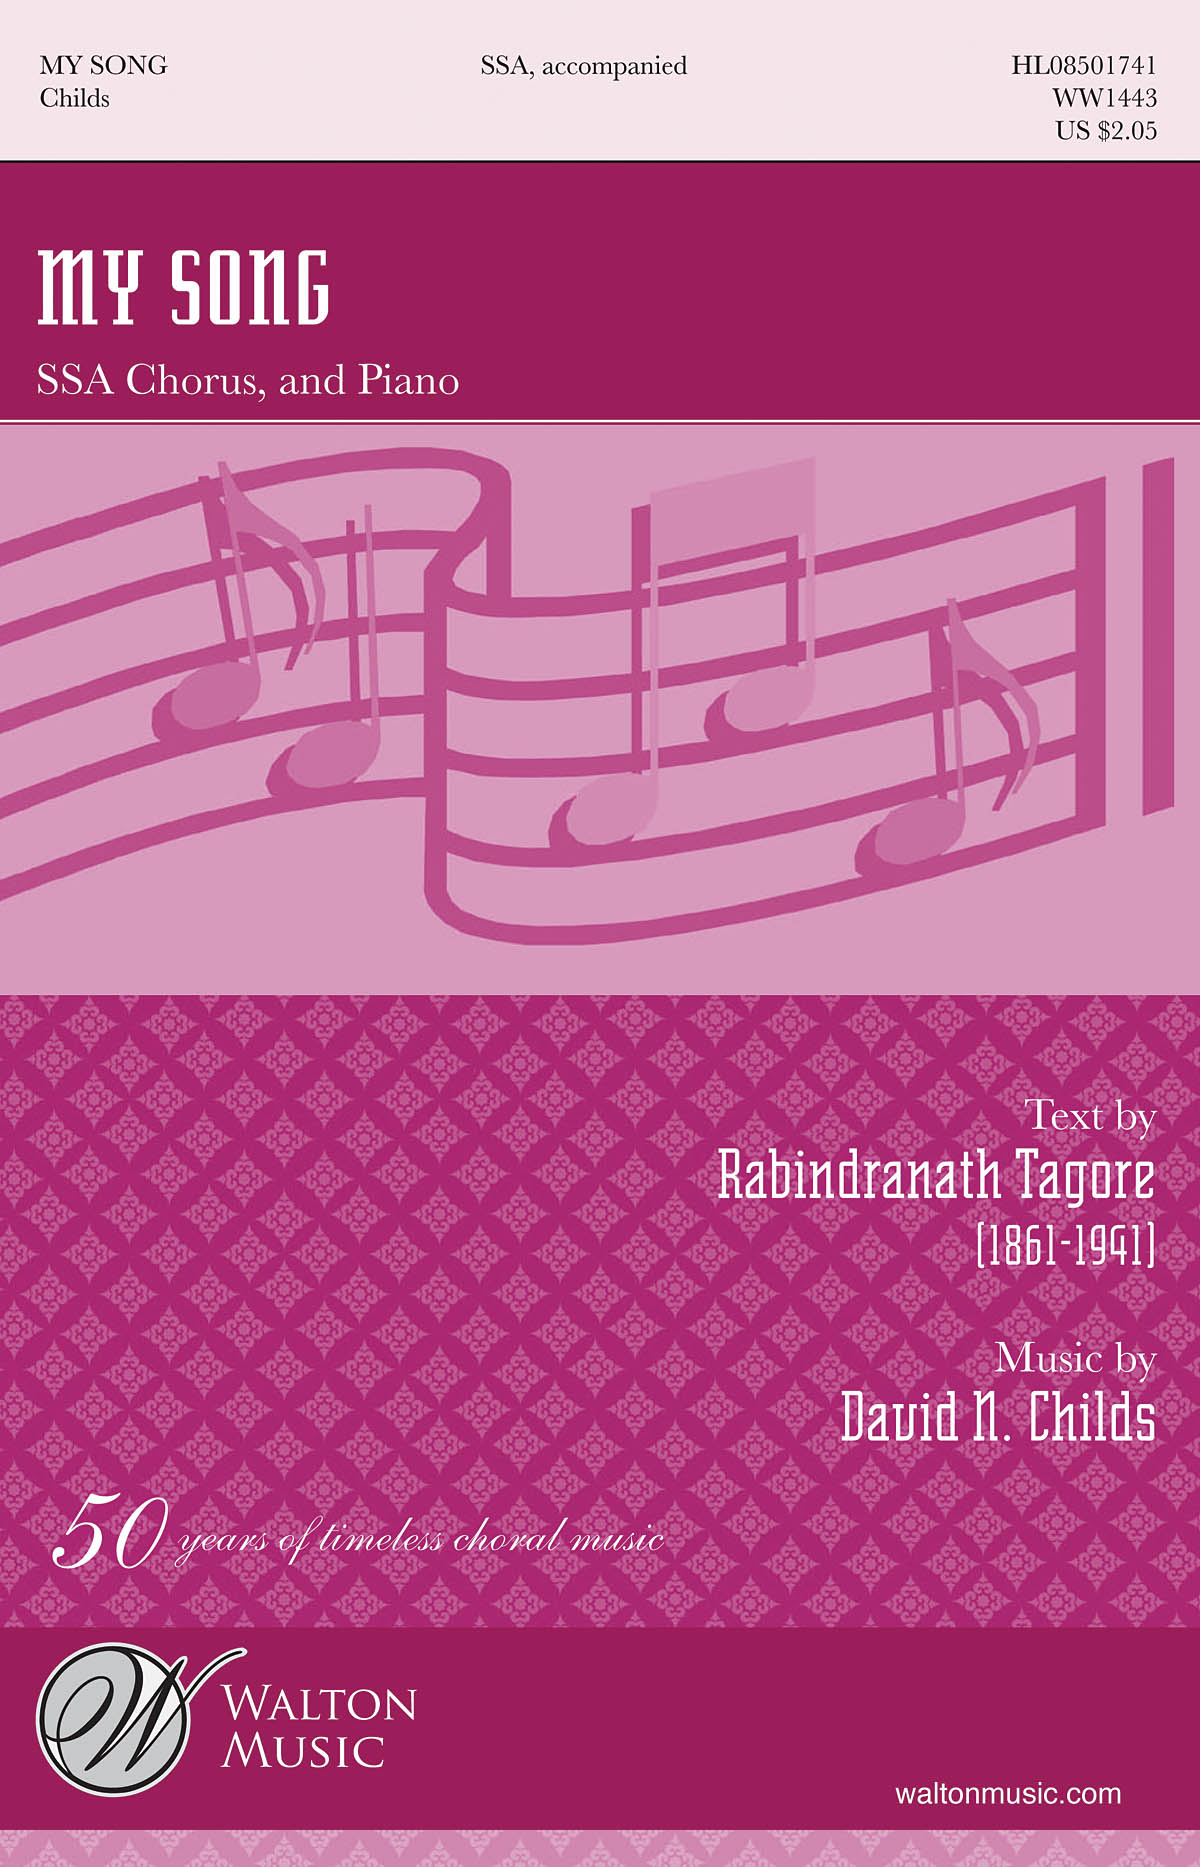 David N. Childs: My Song: SSA: Vocal Score